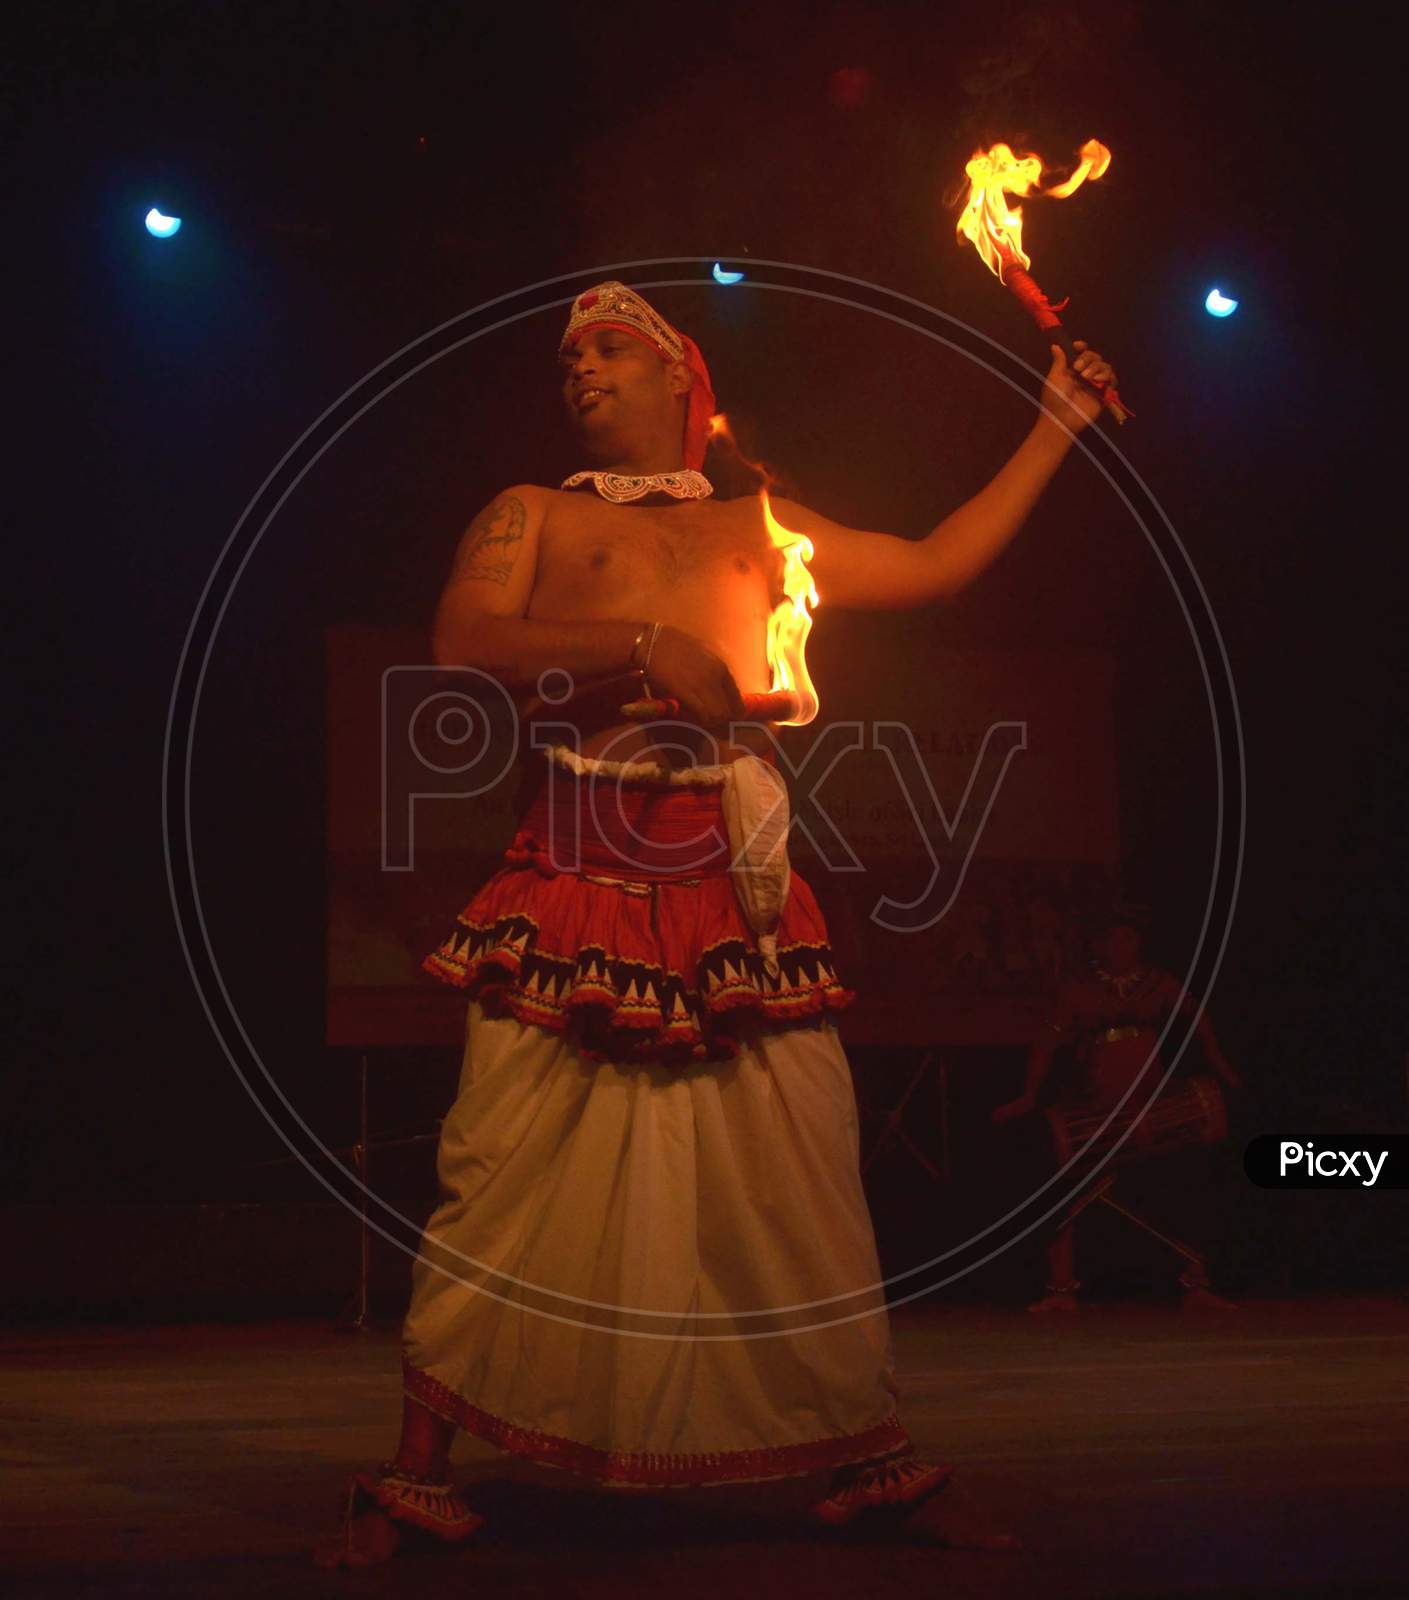 Artist from Sri Lanka performing dance  with fire